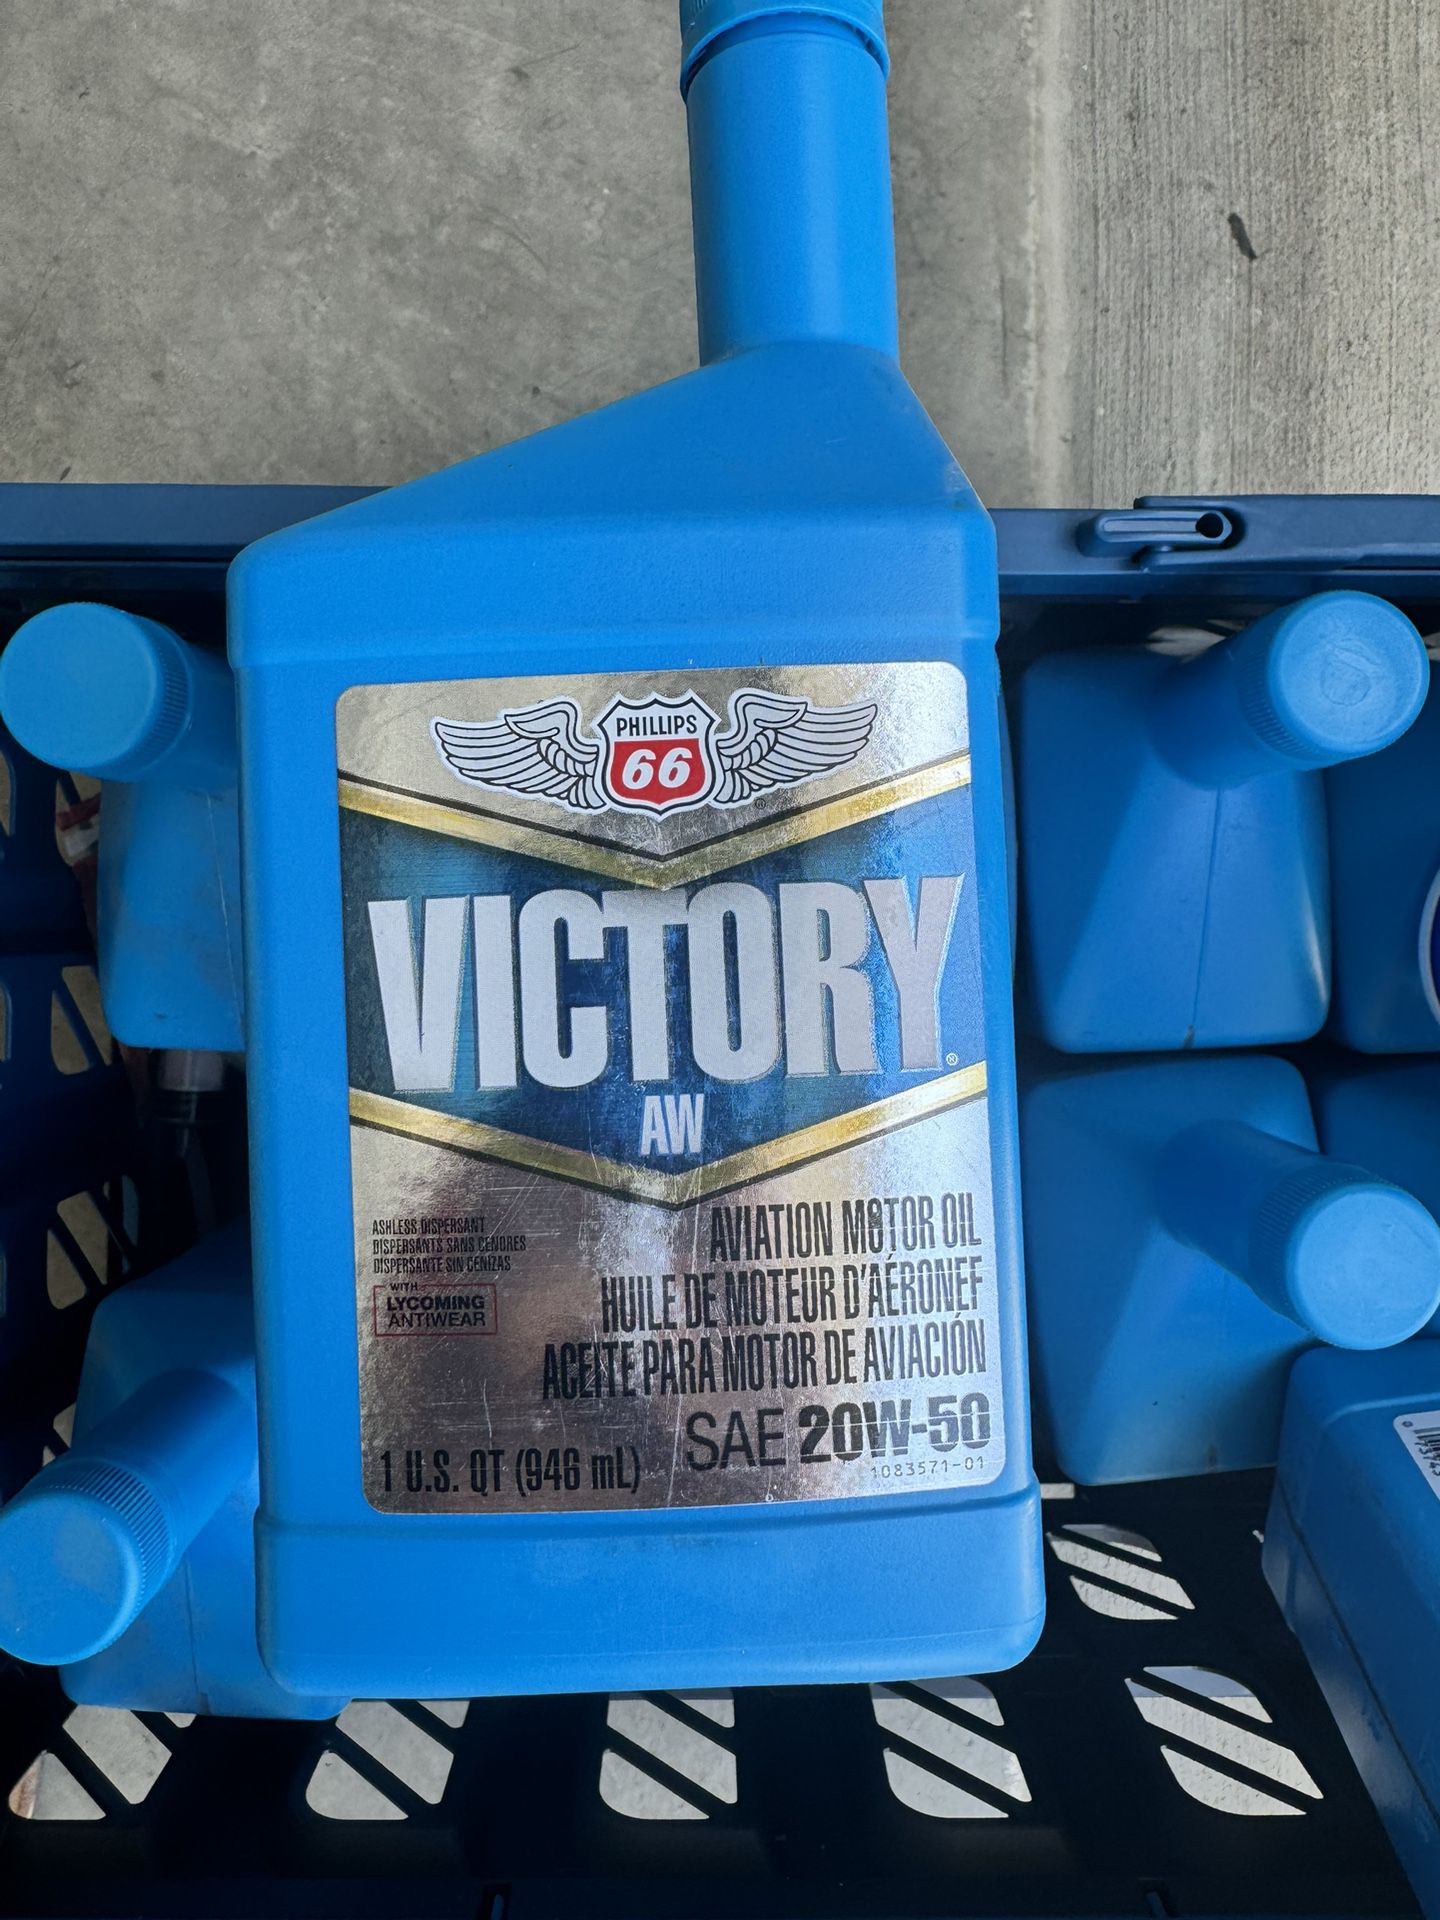 Phillips 66 victory AW 20W-50